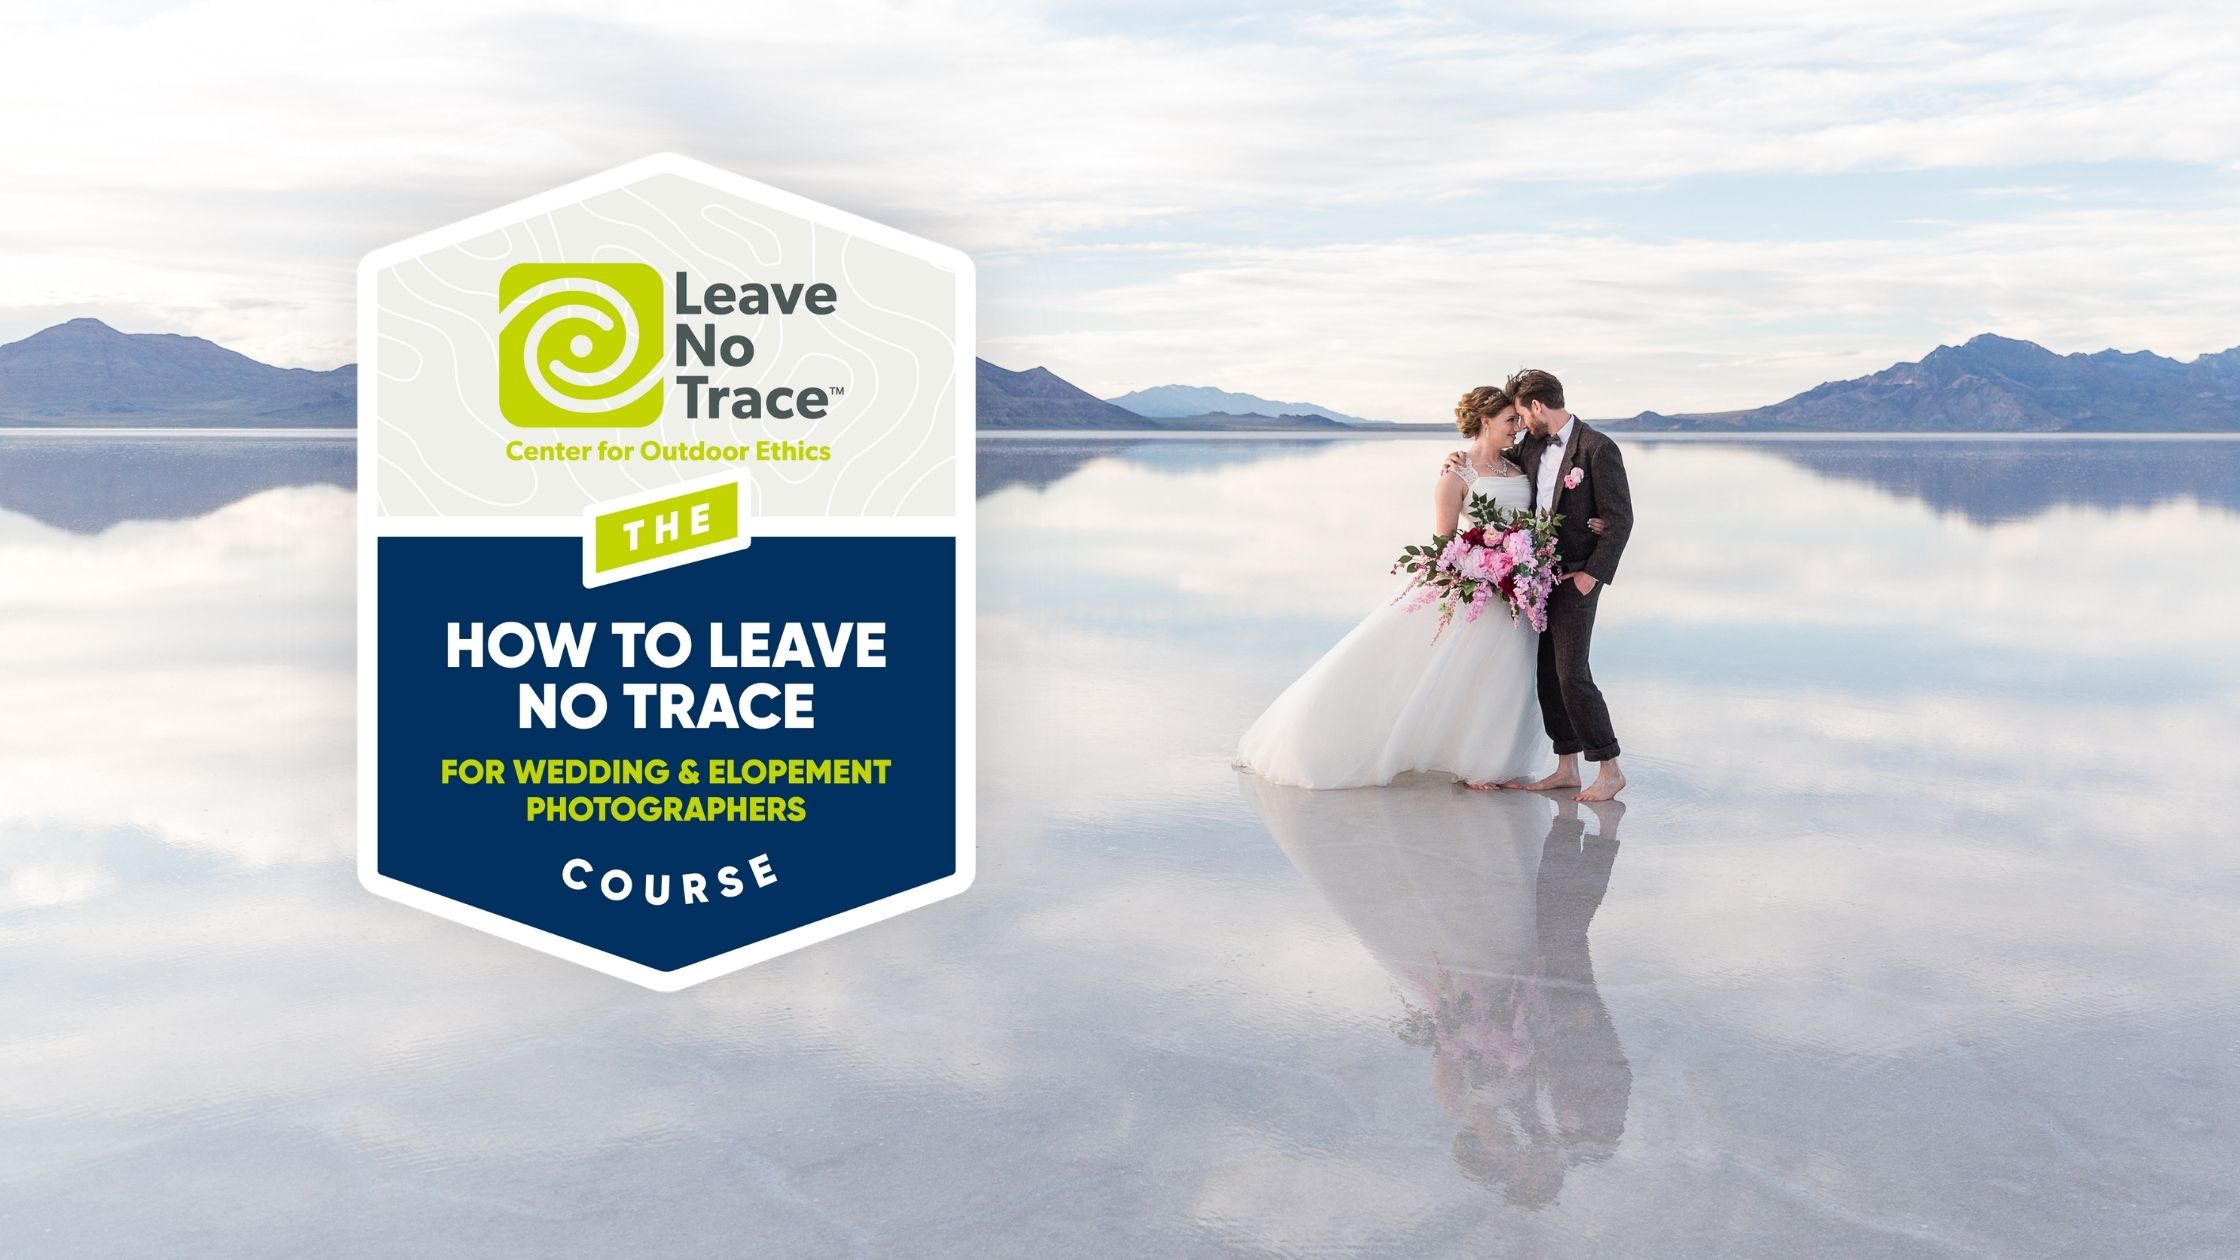 Leave No Trace Aware Photographer